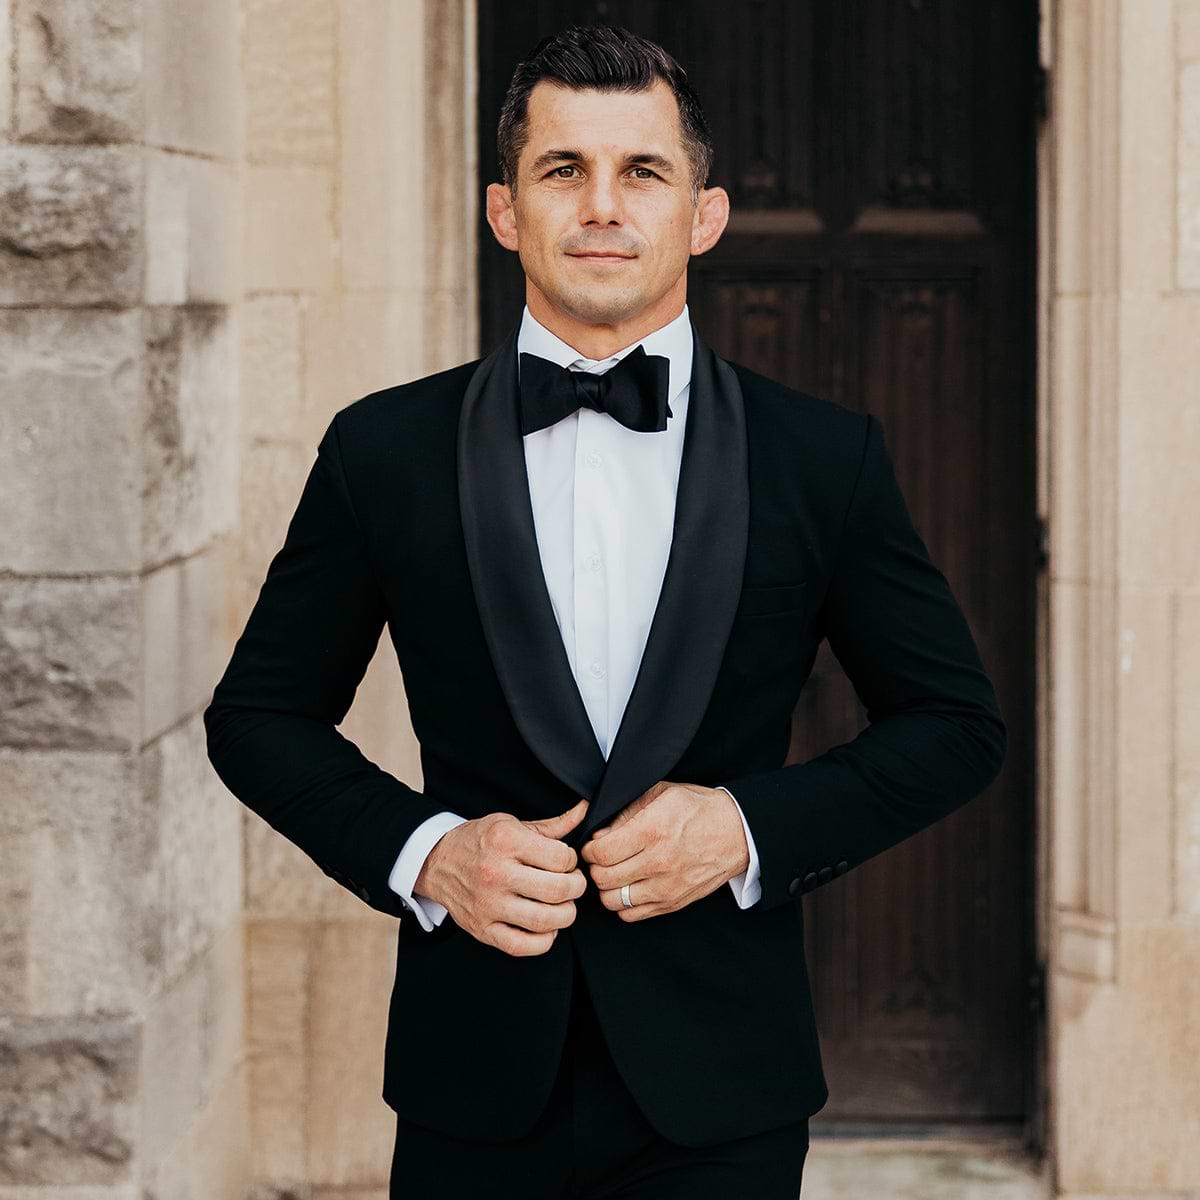 Athletic Fit Stretch Tuxedo - Black with Shawl Lapel